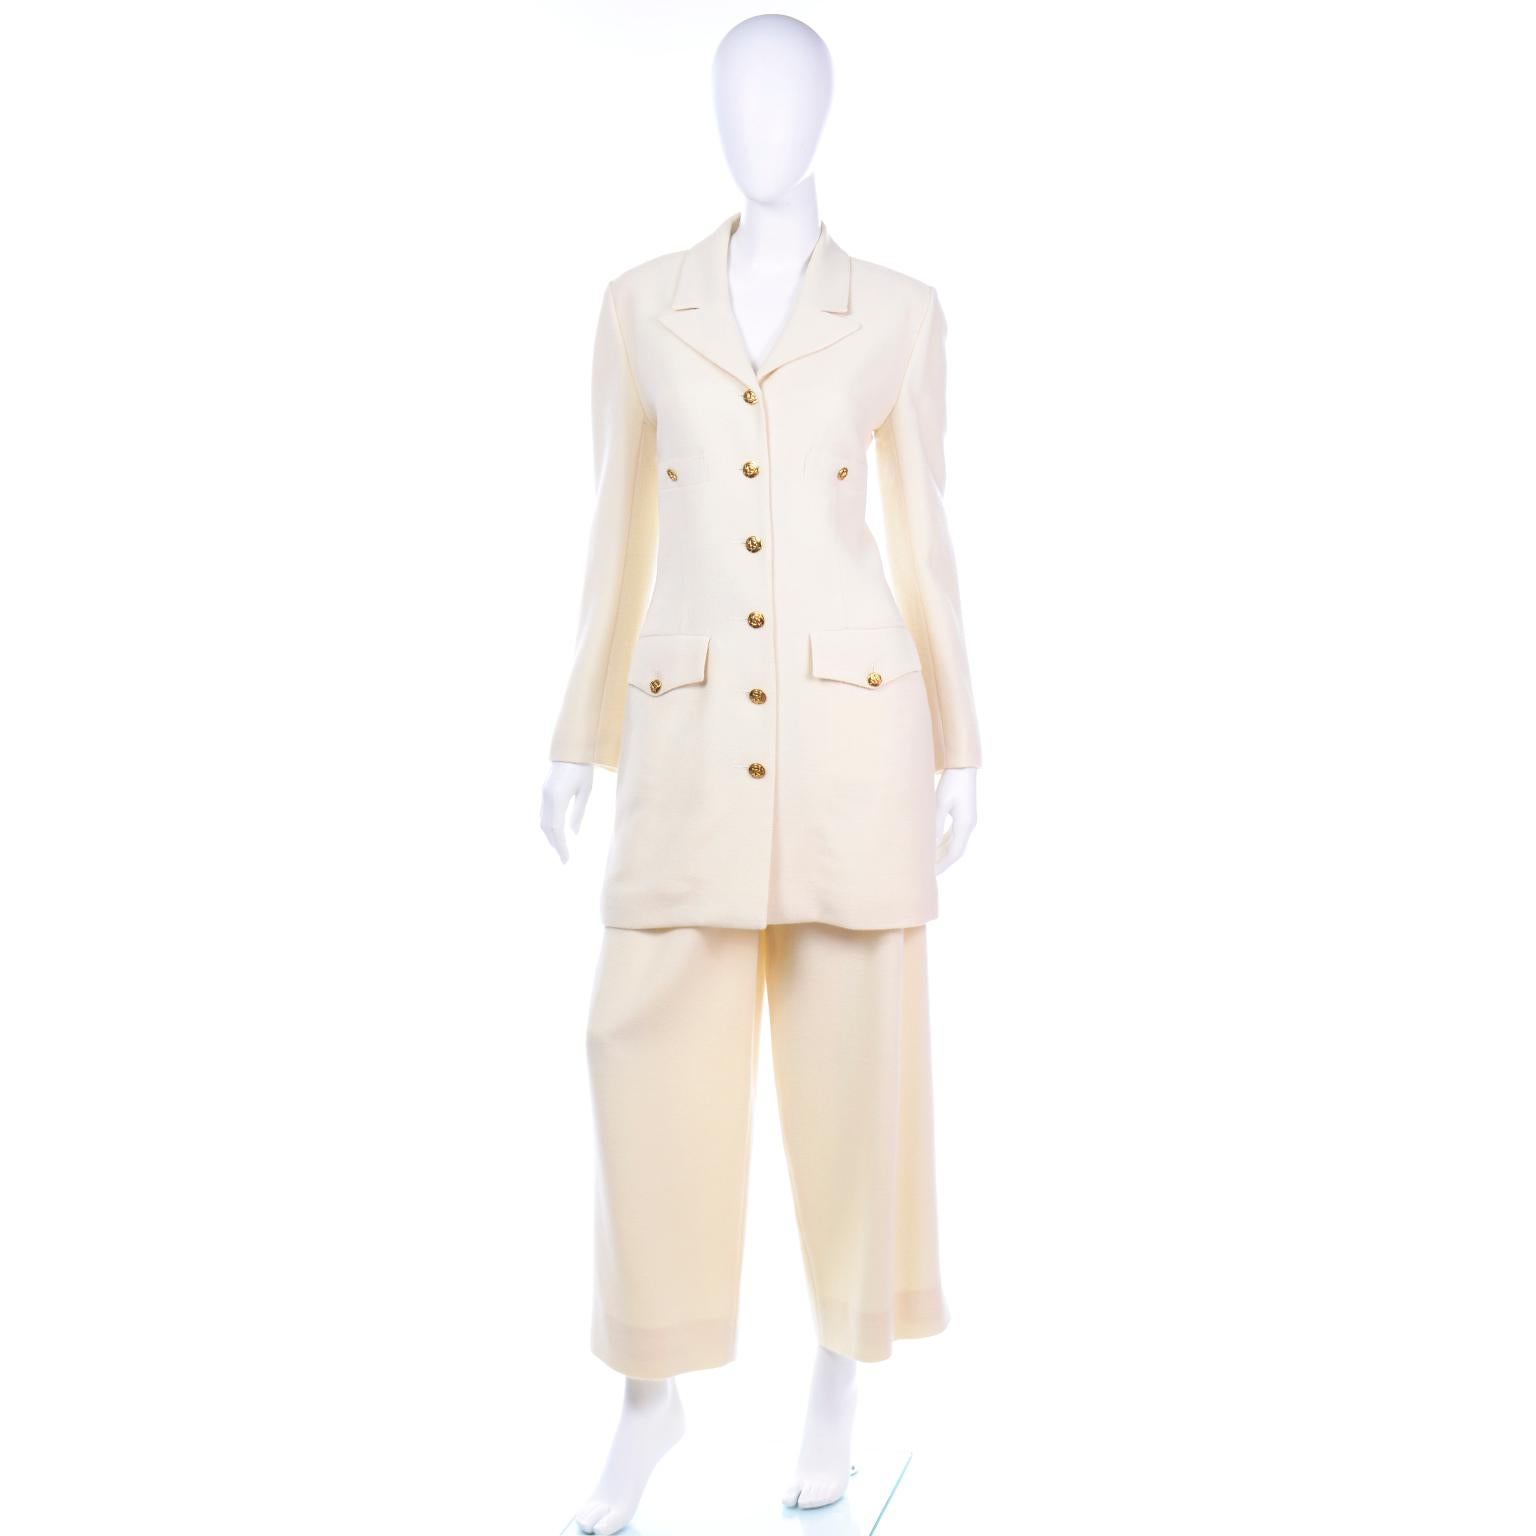 This is such a beautiful Sonia Rykiel ivory textured wool suit with a long line blazer and pleated wide leg trousers. The longline jacket has two functional buttoned breasted pockets and two flap pockets. The front of the jacket is secured with